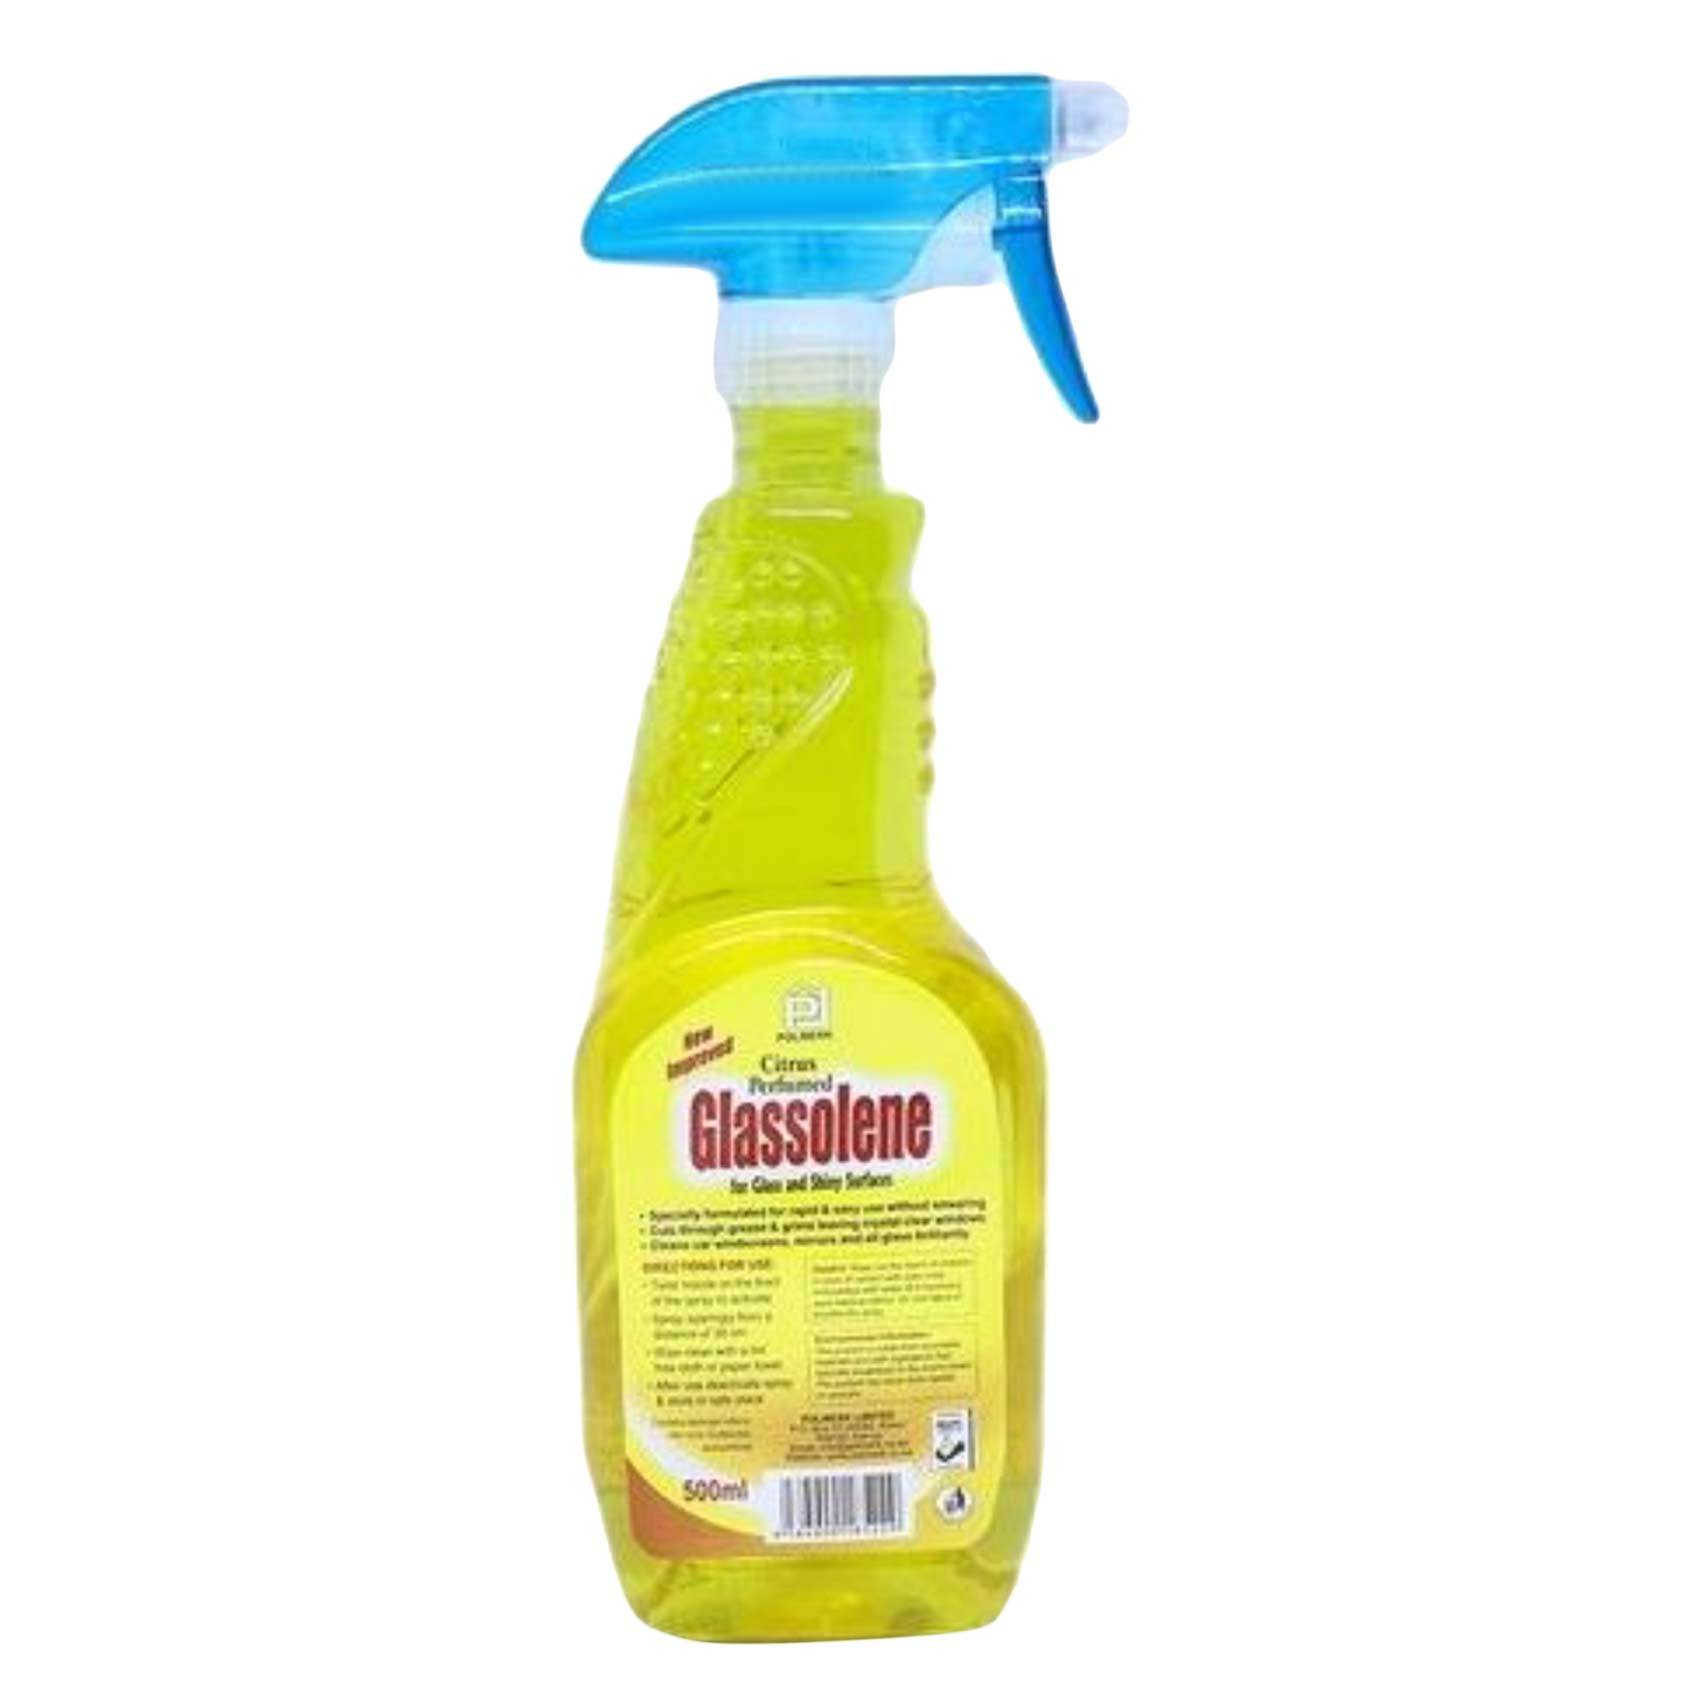 Glassolene Citrus Glass And Shiny Surfaces Cleaner 500ml